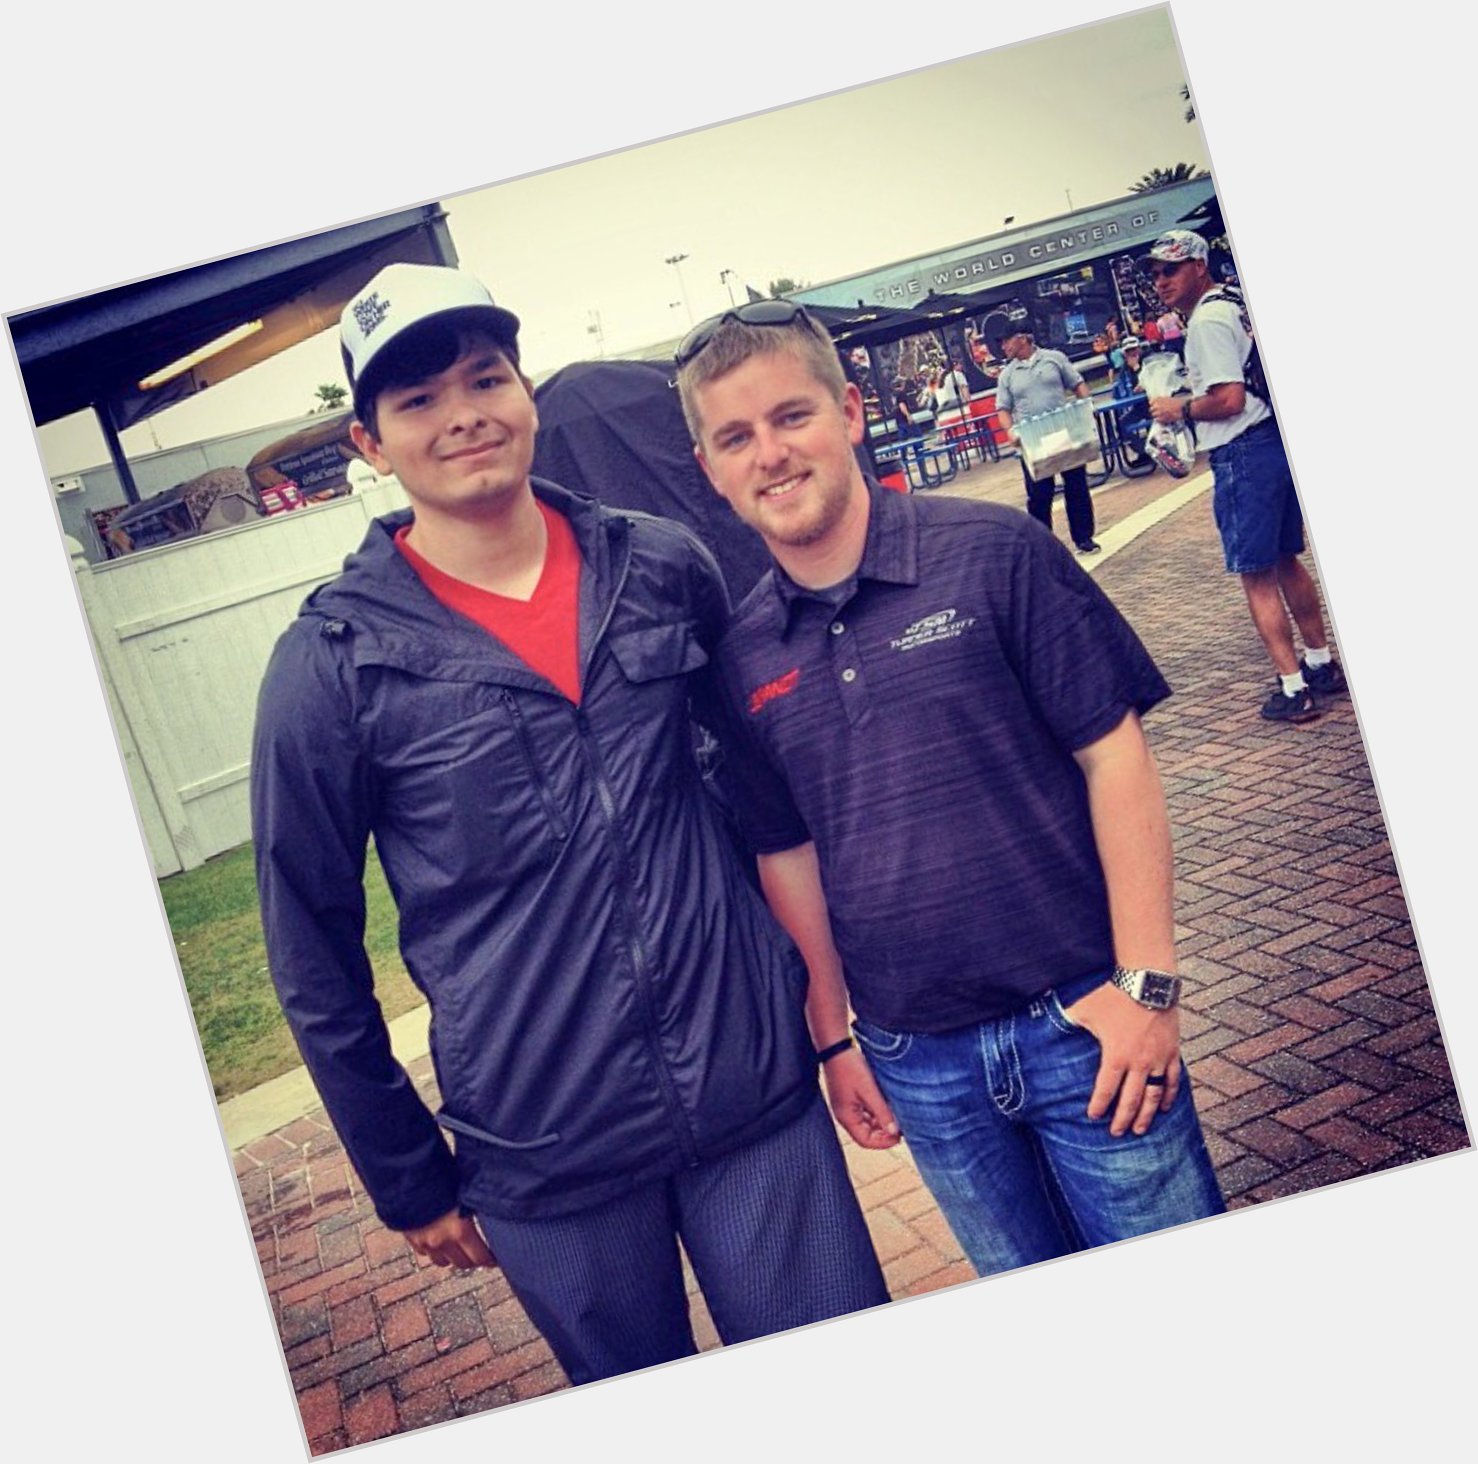 Happy Birthday Justin Allgaier!
Justin gave me a few minutes to talk and take a picture during the 2013 Daytona 500. 